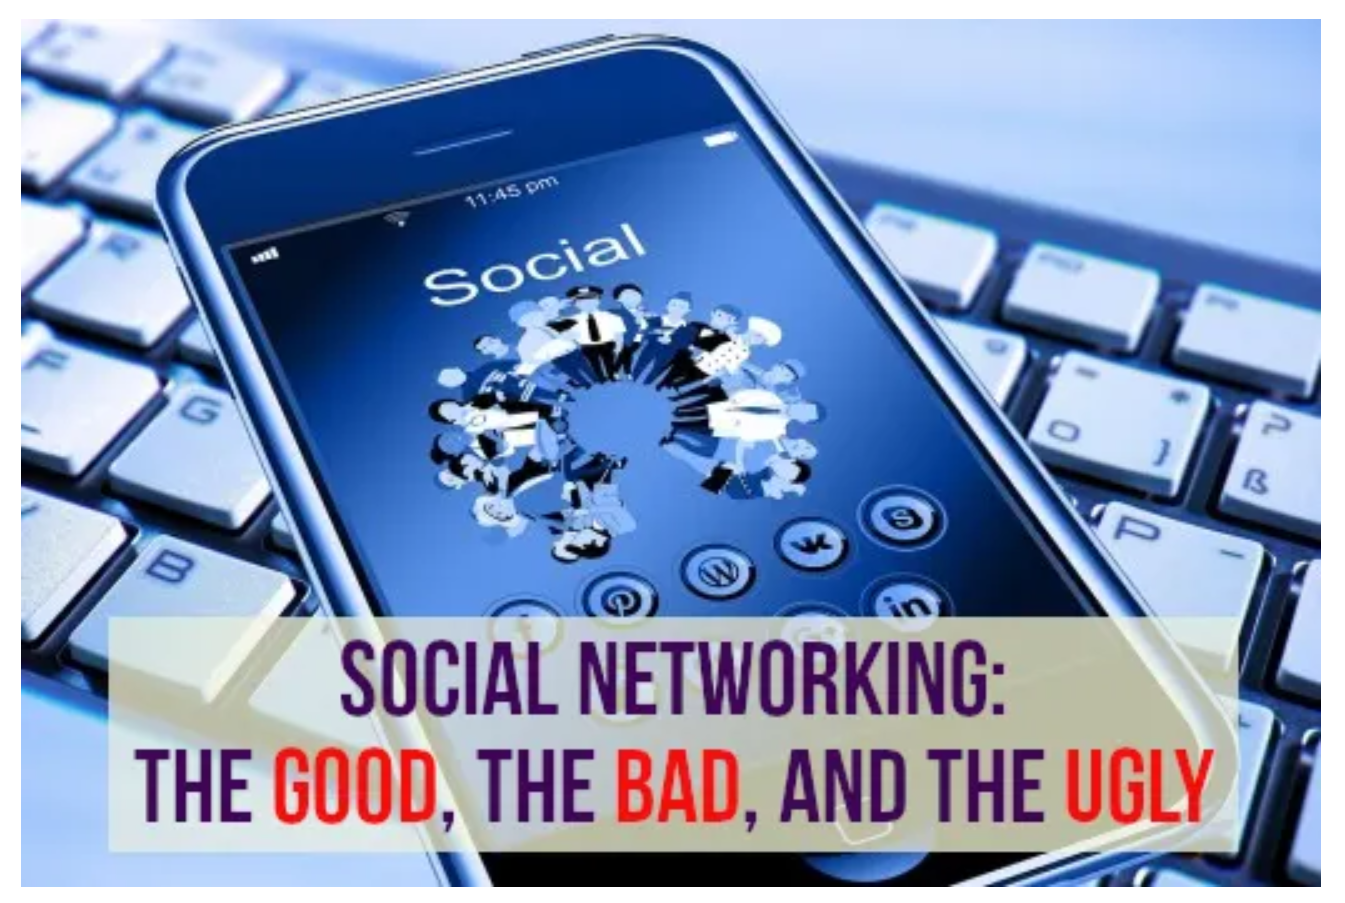 THE MAJOR ADVANTAGES OF SOCIAL NETWORKING